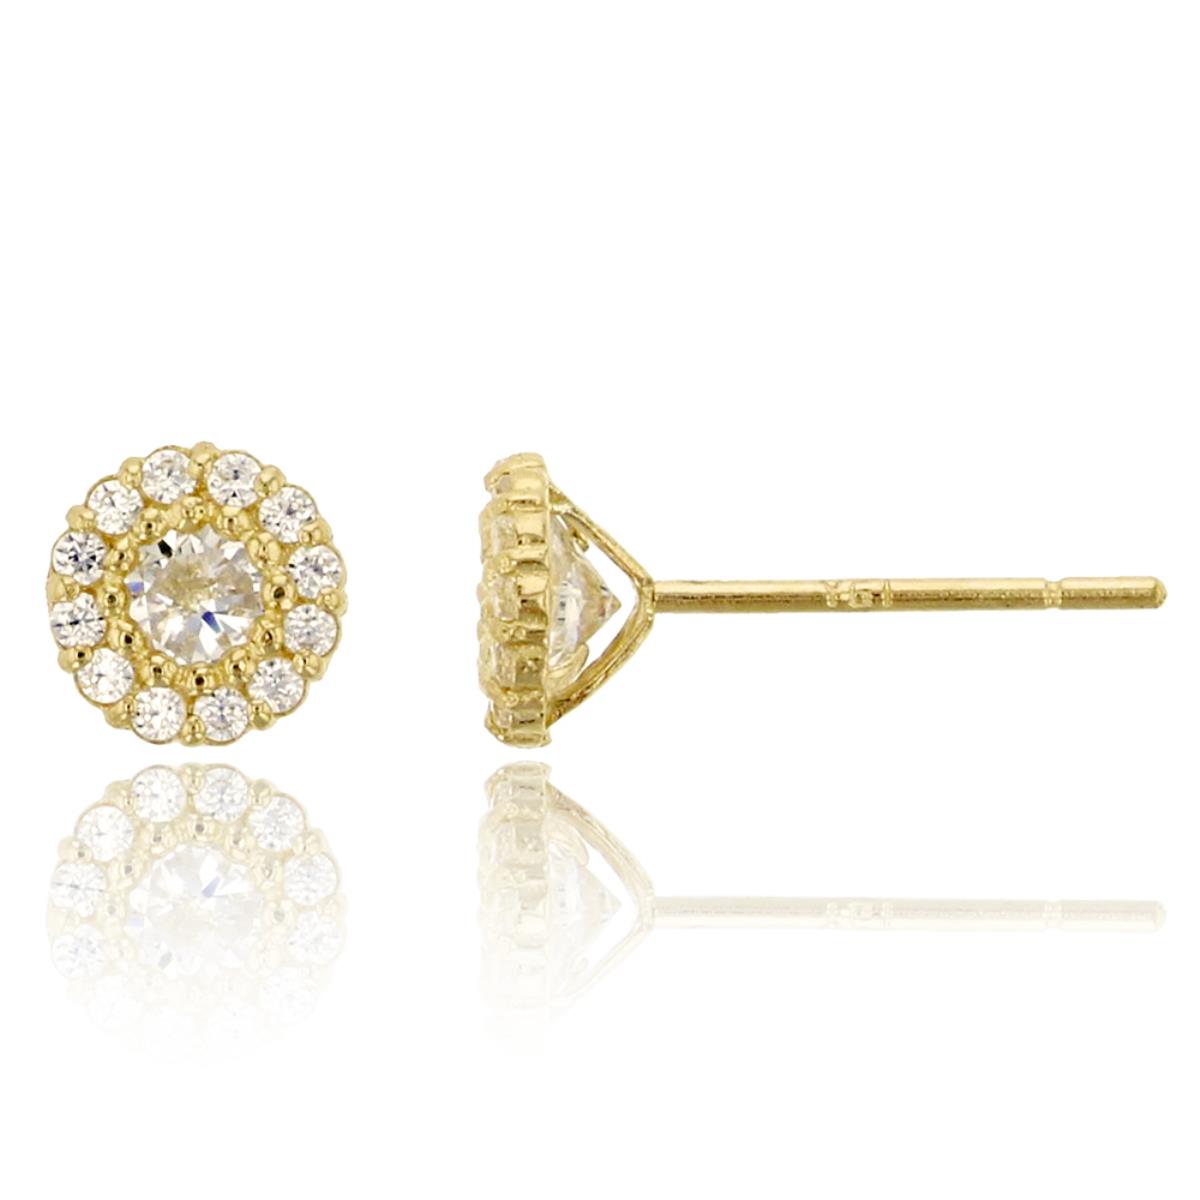 14K Yellow Gold Pave 3.25mm Round Bubble Cluster Stud Earring